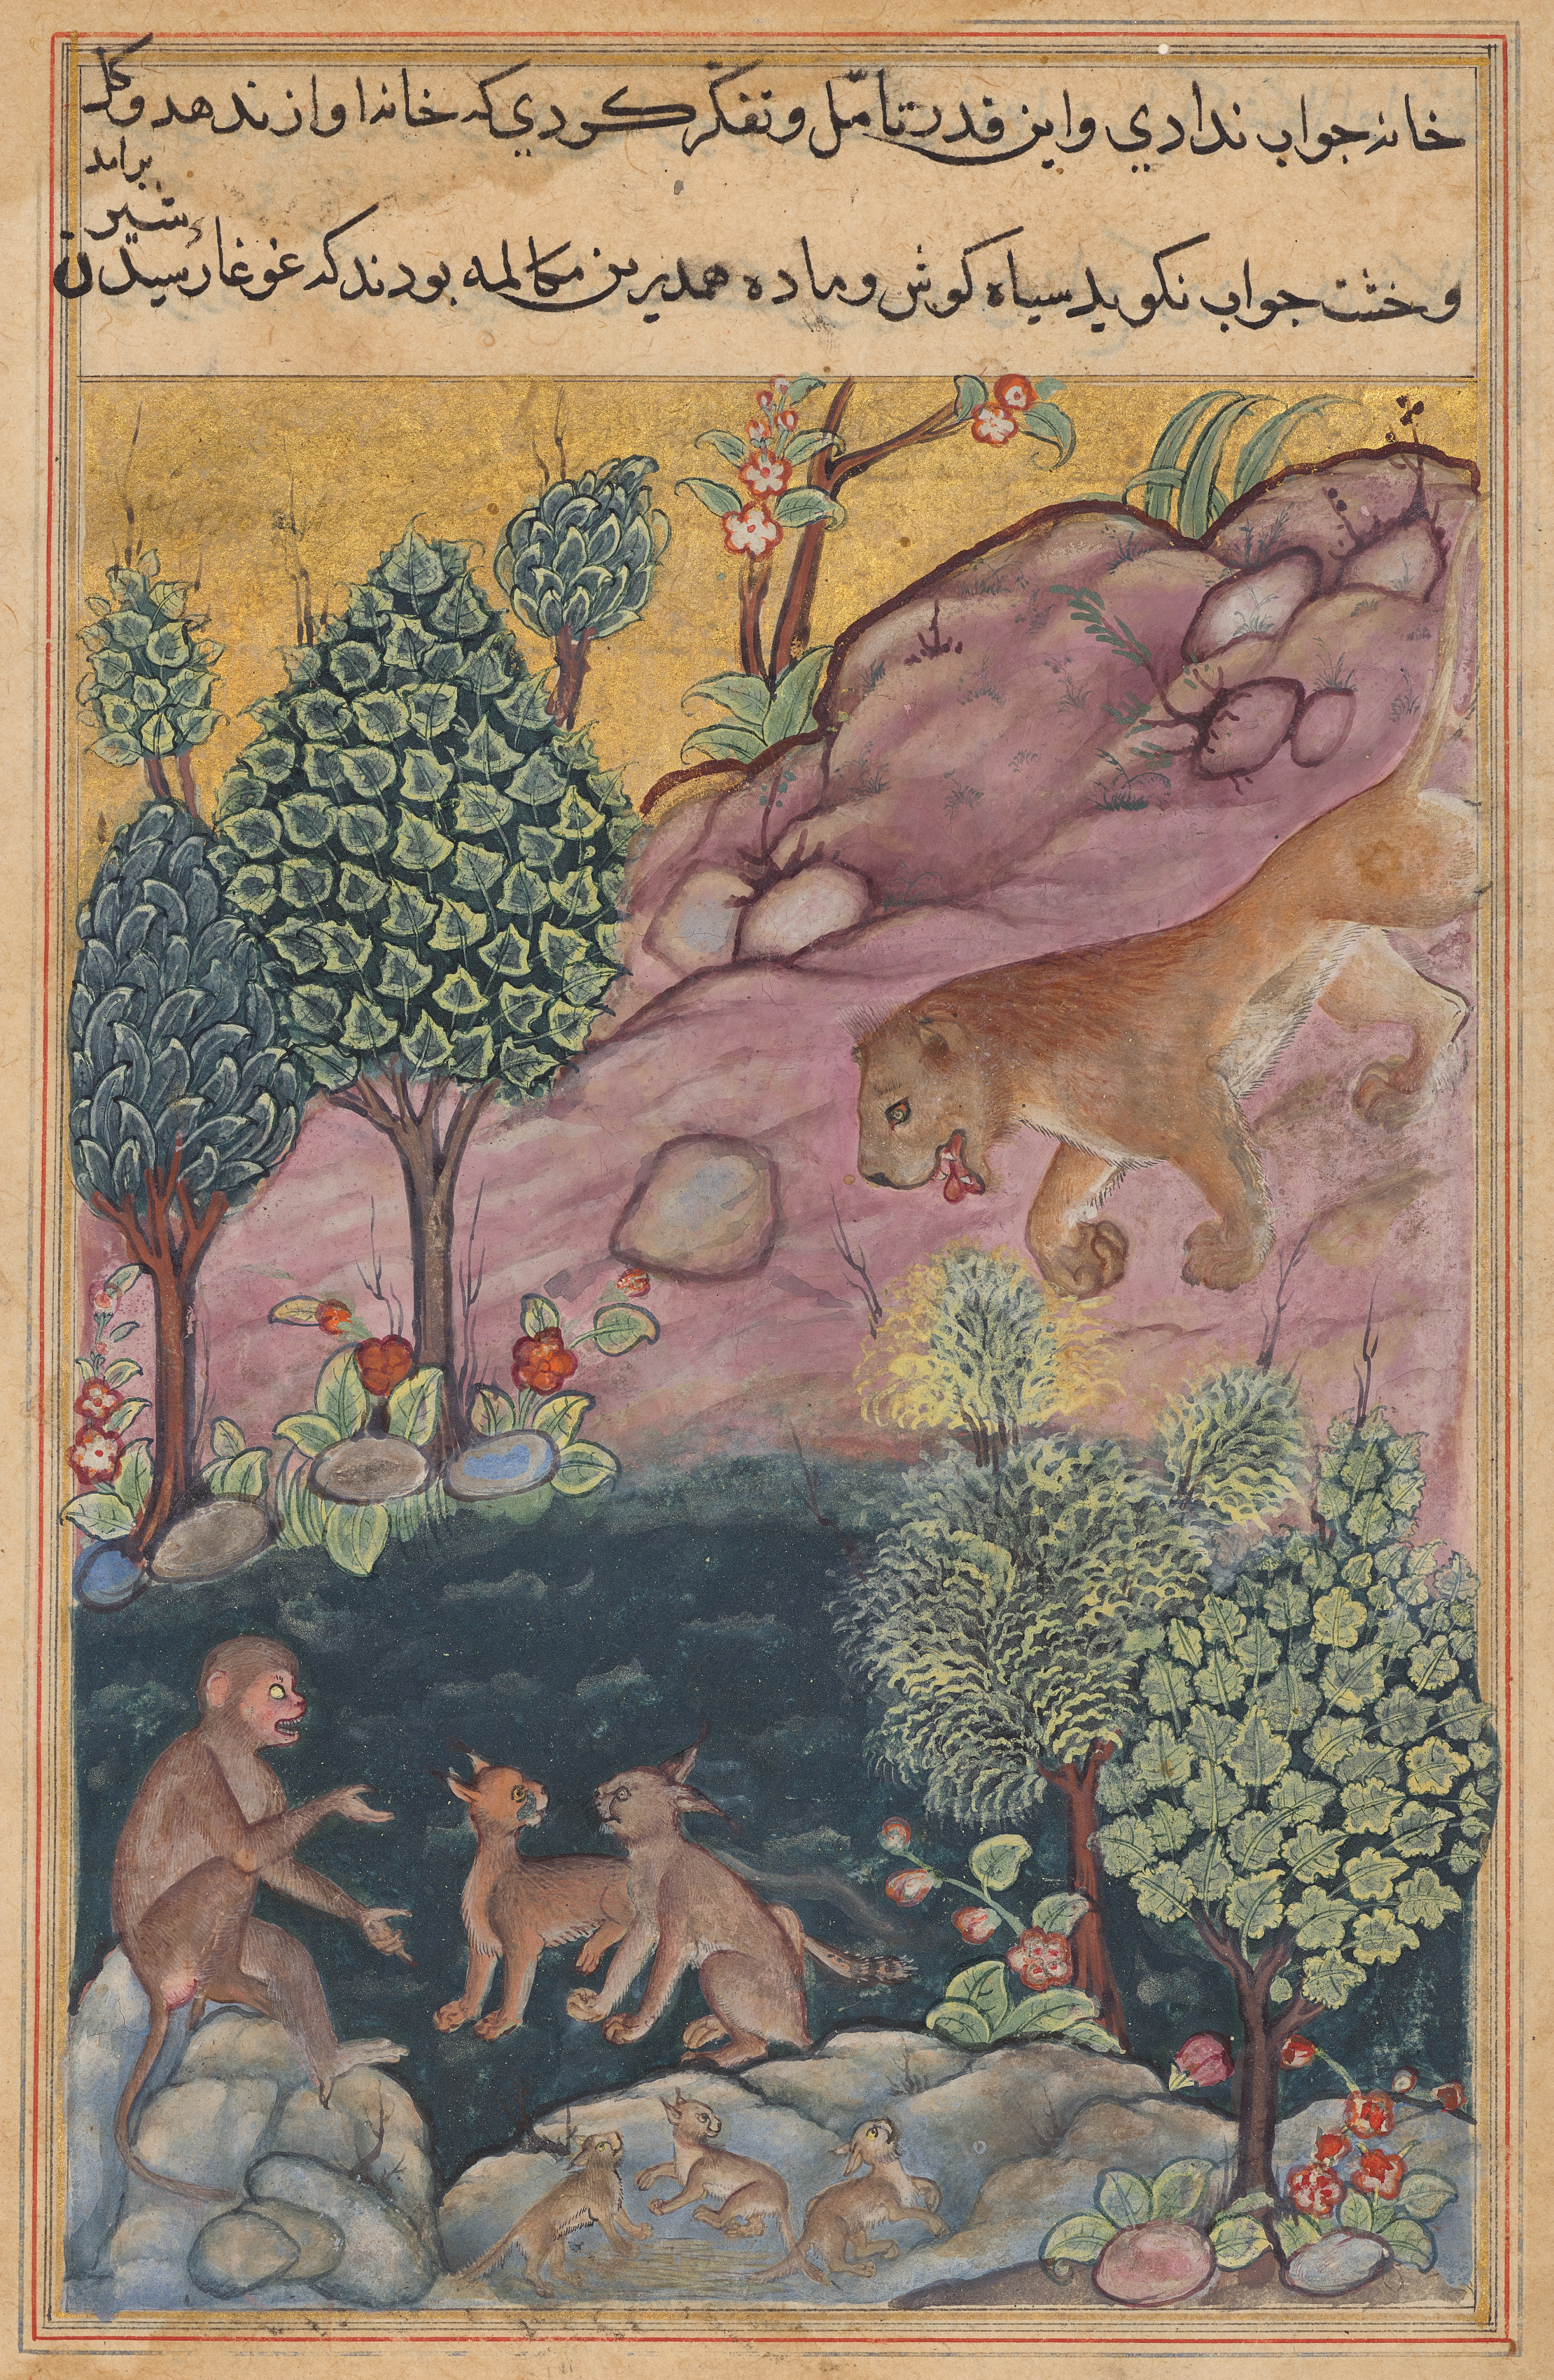 The lion returns to his territory and sees the monkey conversing with the lynx, from a Tuti-nama (Tales of a Parrot): Twenty-ninth Night